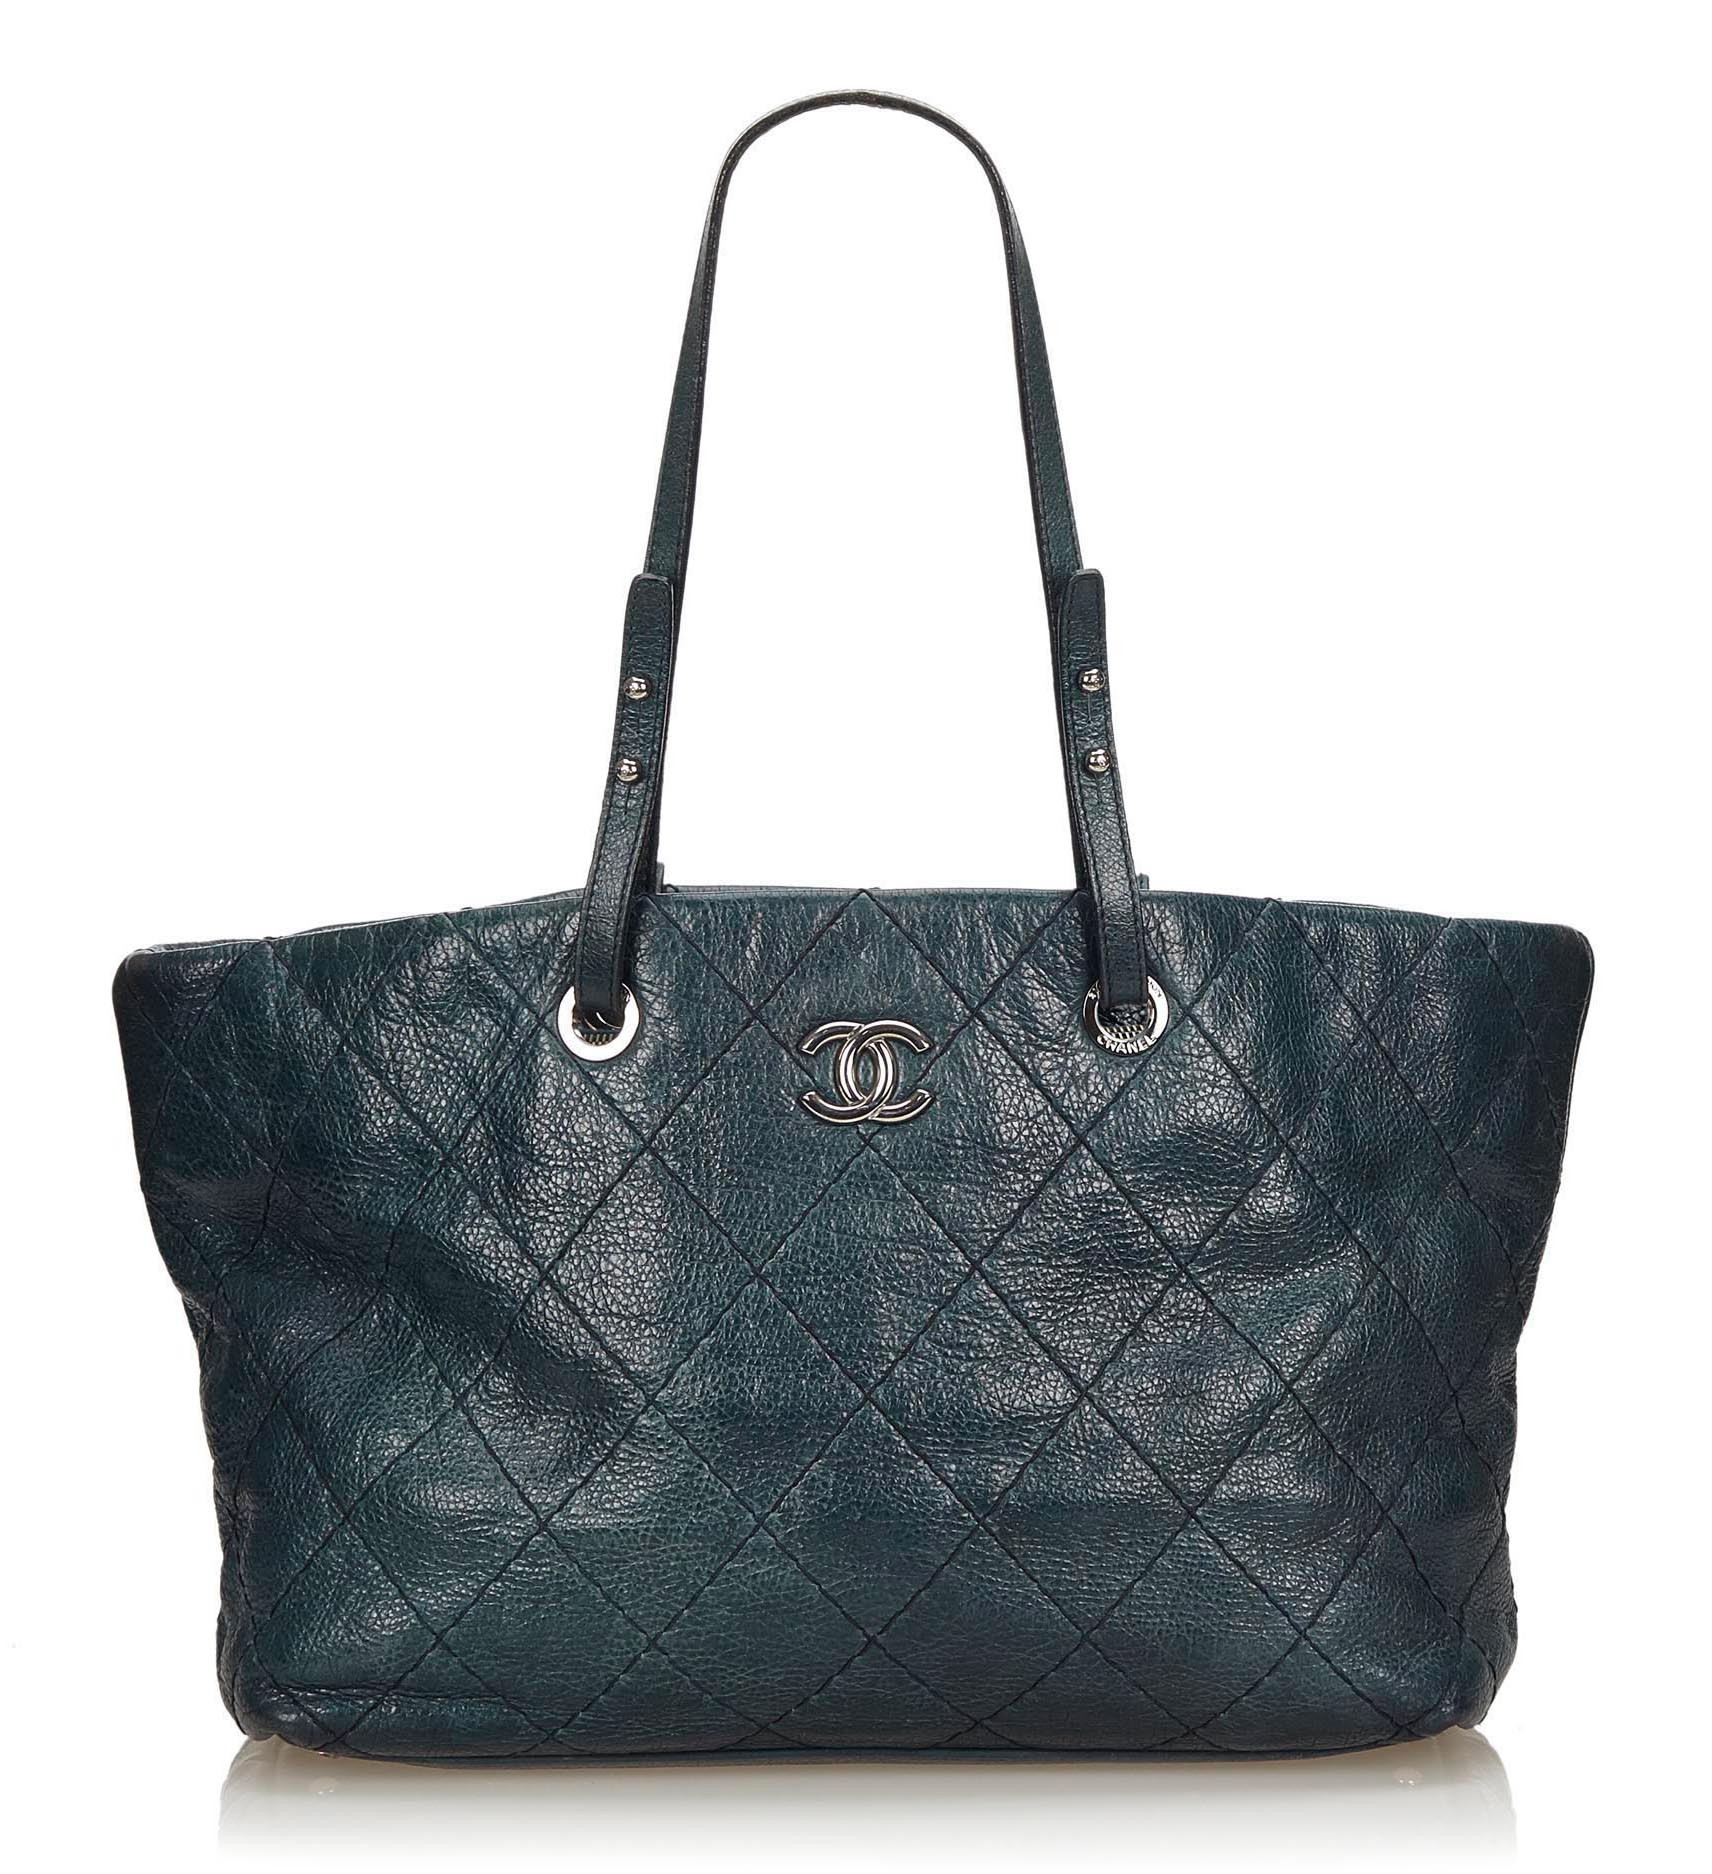 Chanel Blue Quilted Caviar Leather Timeless CC Soft Shopper Tote